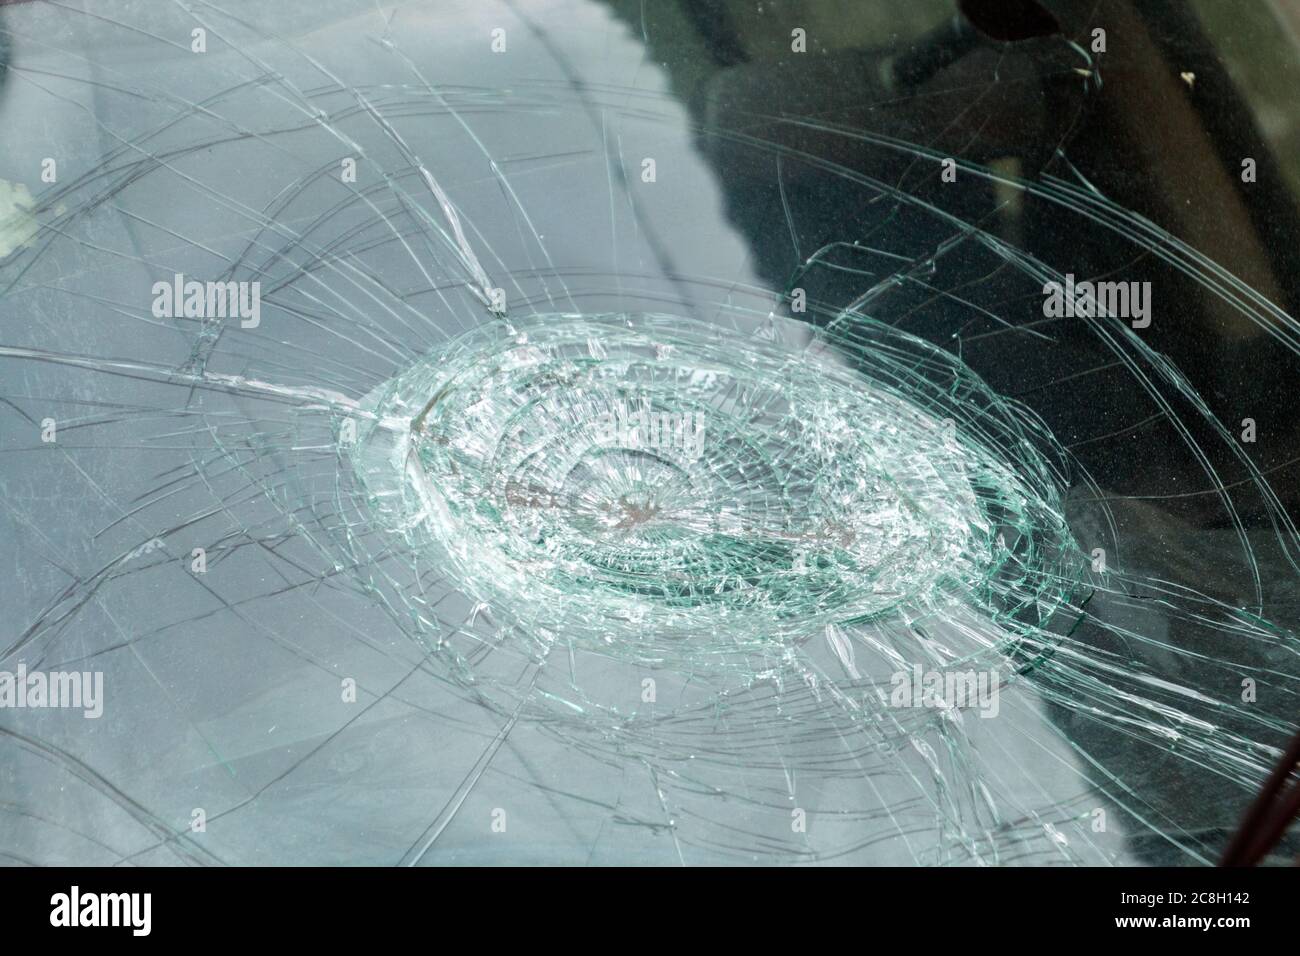 broken car front glass,cracked car front glass,car accident,broken car wind shield,Shattered Windshield after car accident. Stock Photo